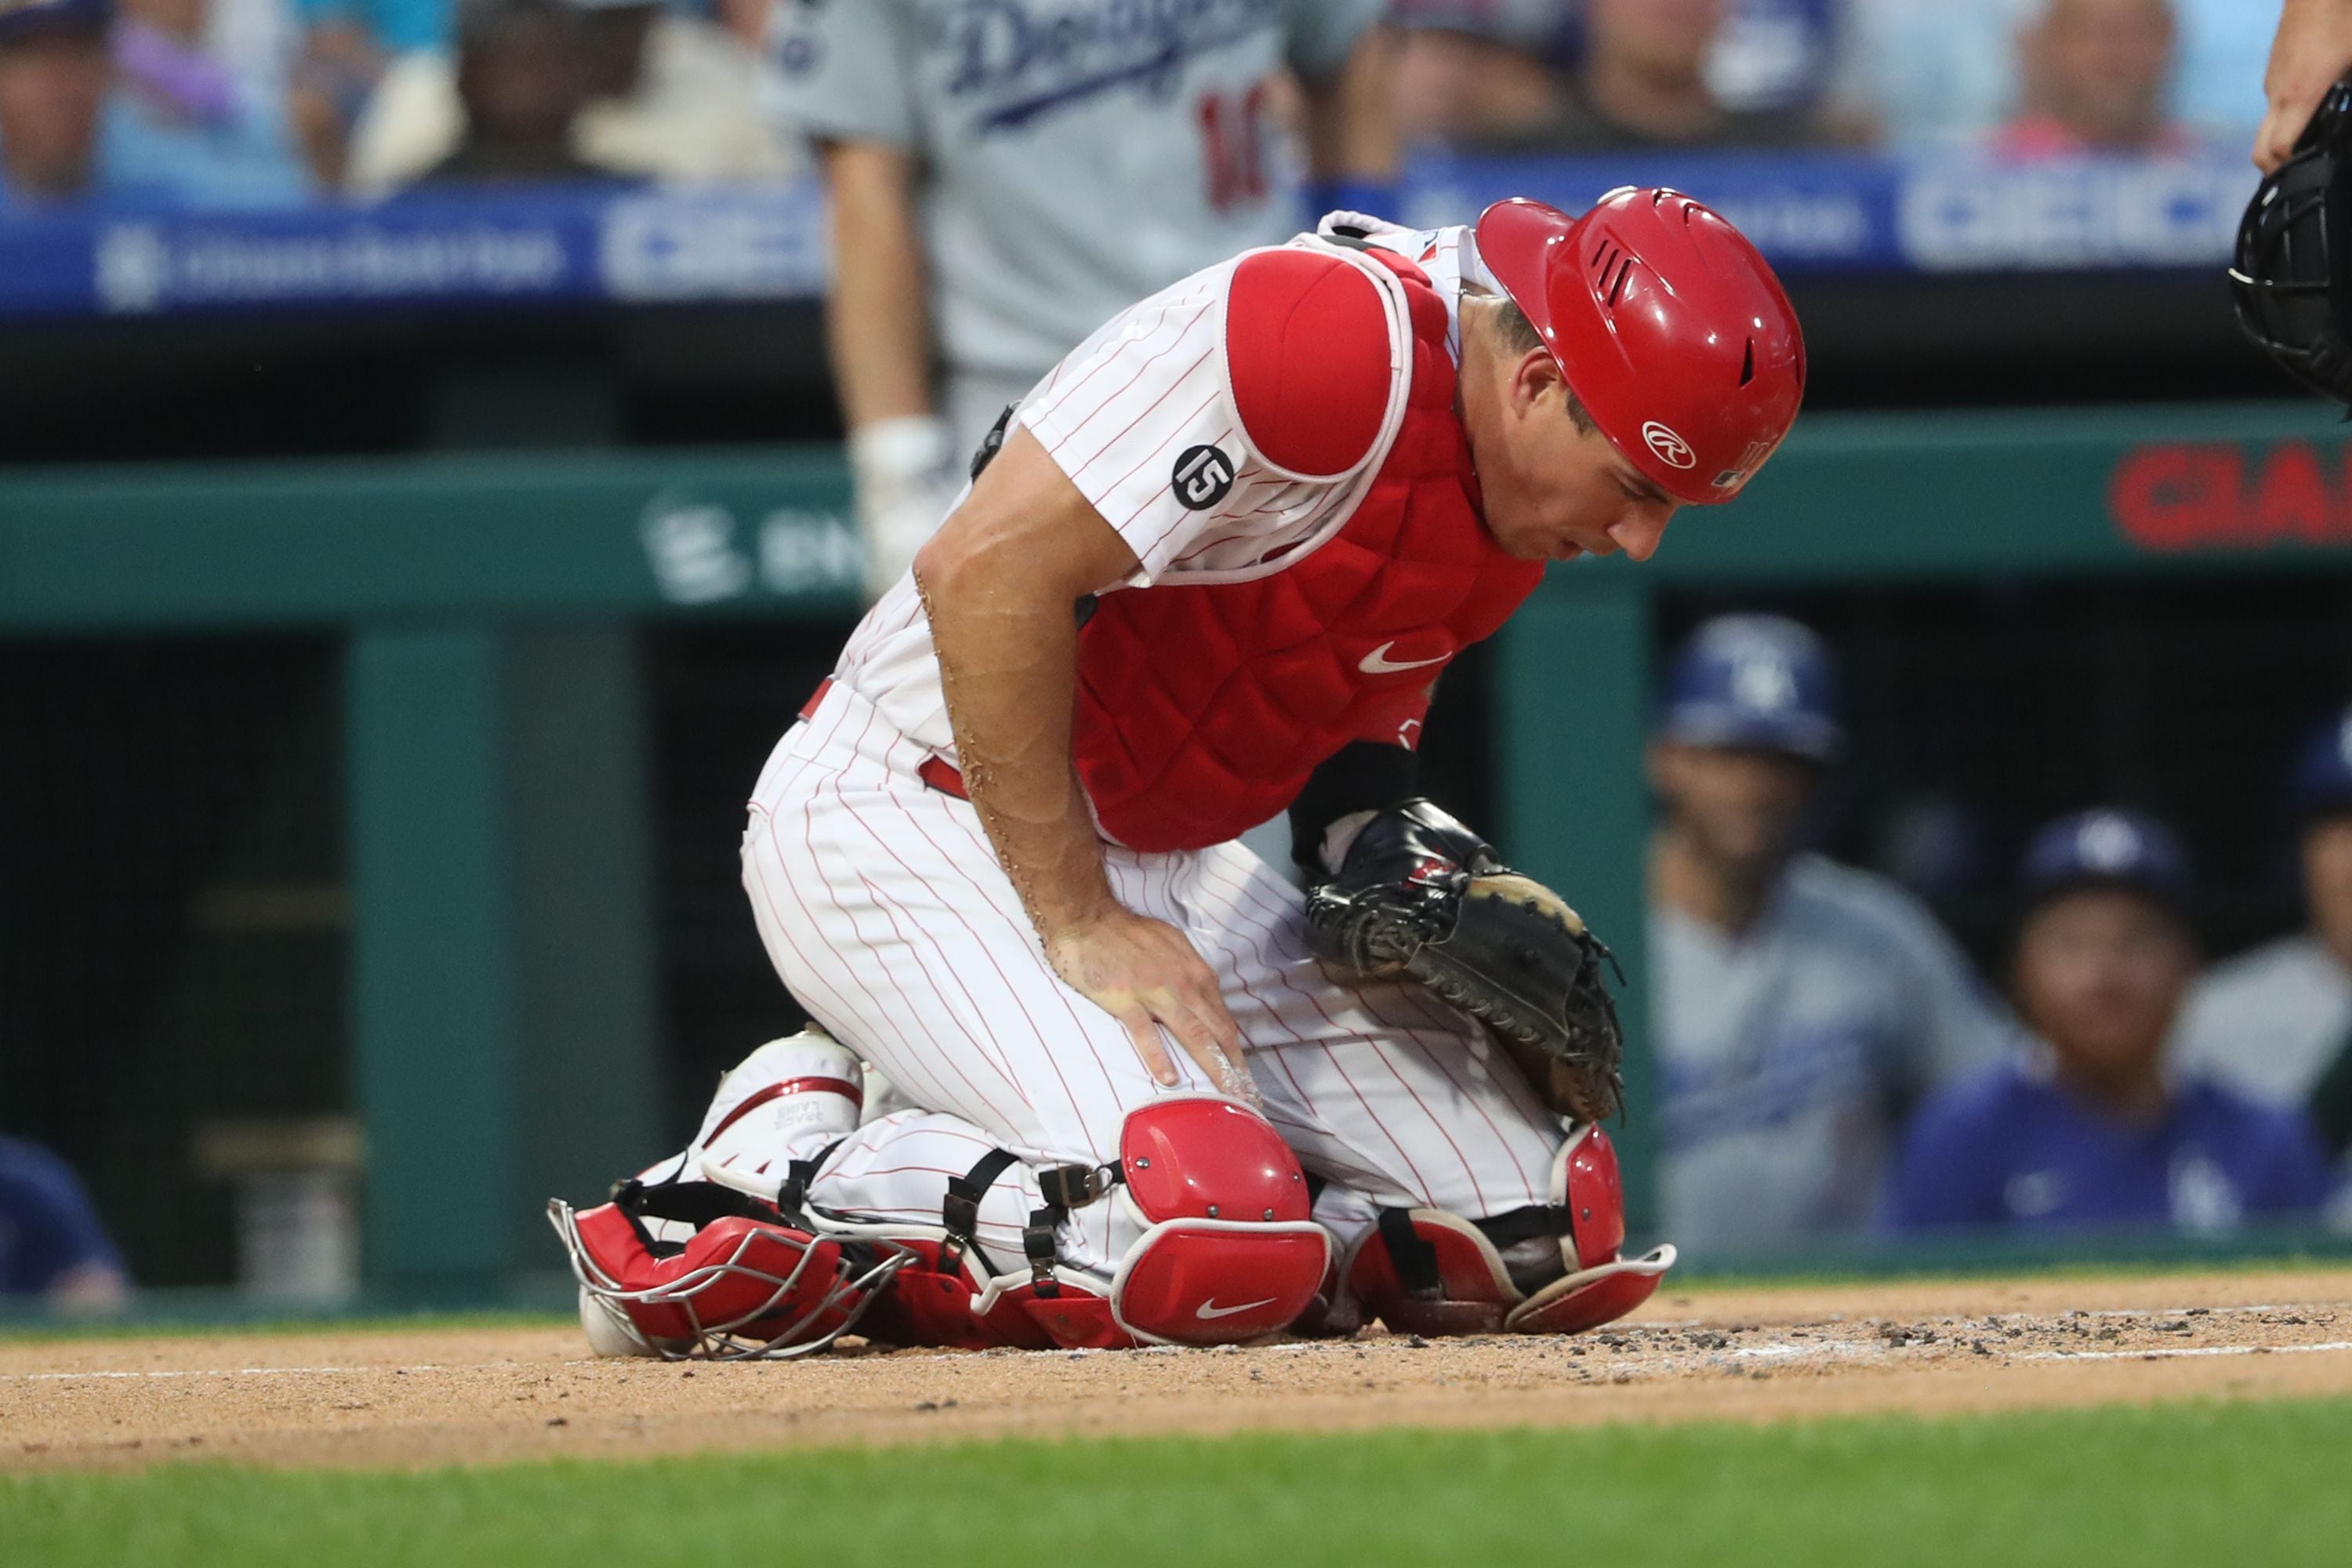 Phillies catcher J.T. Realmuto undergoing concussion testing after taking  two foul balls off mask